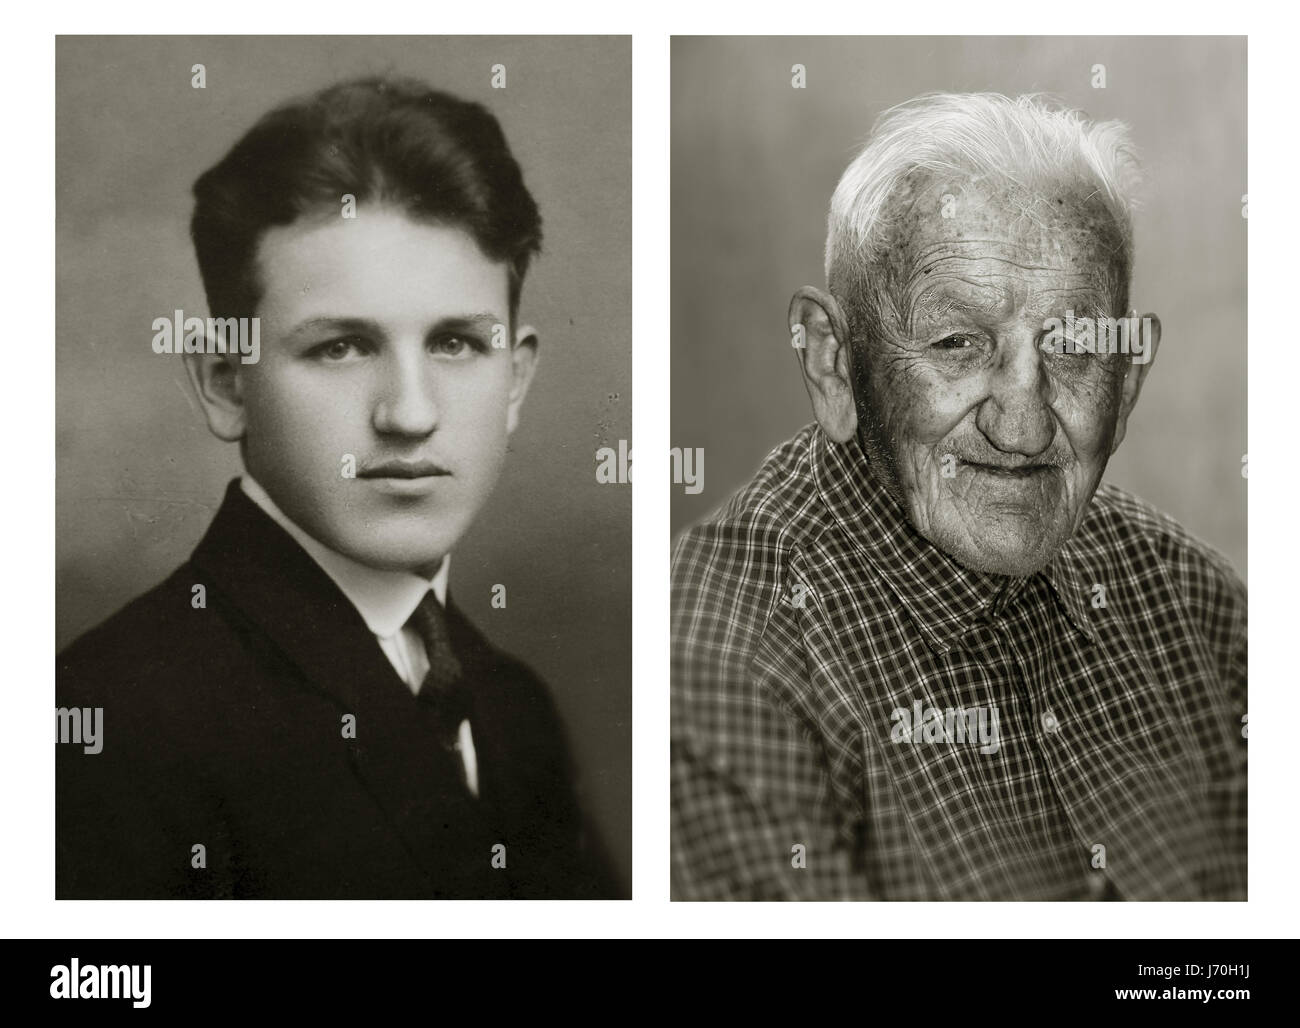 Stanislav Spáčil. LEft: 17 years old, right: 102 years old. He was an electrical engineer and now lives in his own house in South Maoravia village. He thinks it is too early to think about the past. POIGNANT portraits have posed centenarians alongside their younger selves in a project called Faces of Century. The incredible images tell the unique stories of each person’s life including one woman who was in the truck that hit and killed high-ranking German Nazi official Reinhard Heydrich’s son Klaus in 1943. Another intriguing tale comes from a 101-year-old woman who decided to leave her luxury Stock Photo